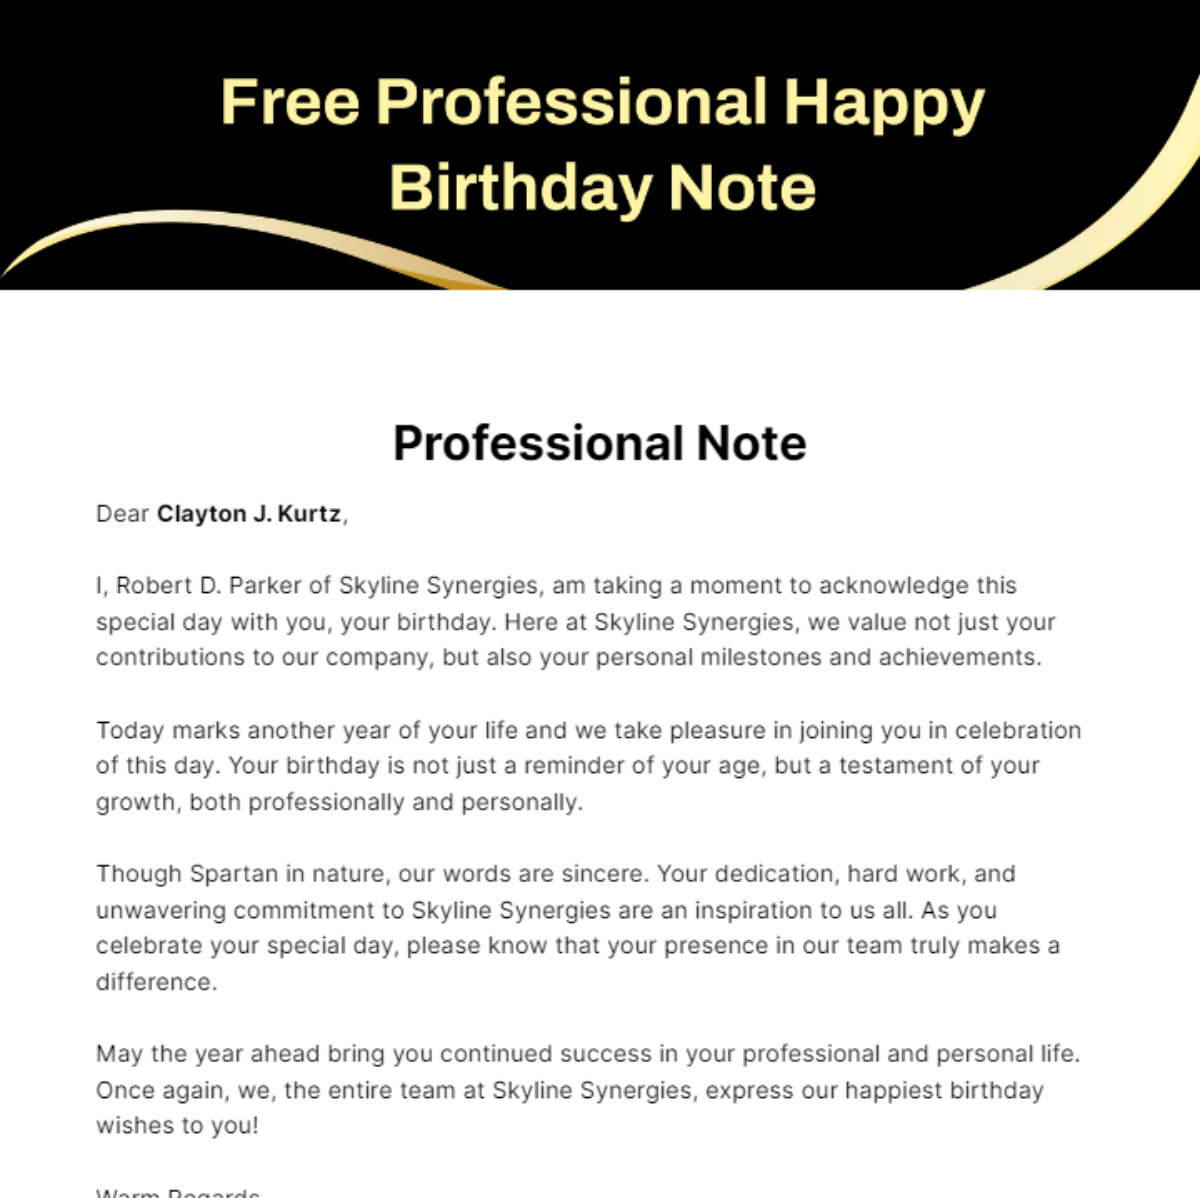 Free Professional Happy Birthday Note Template